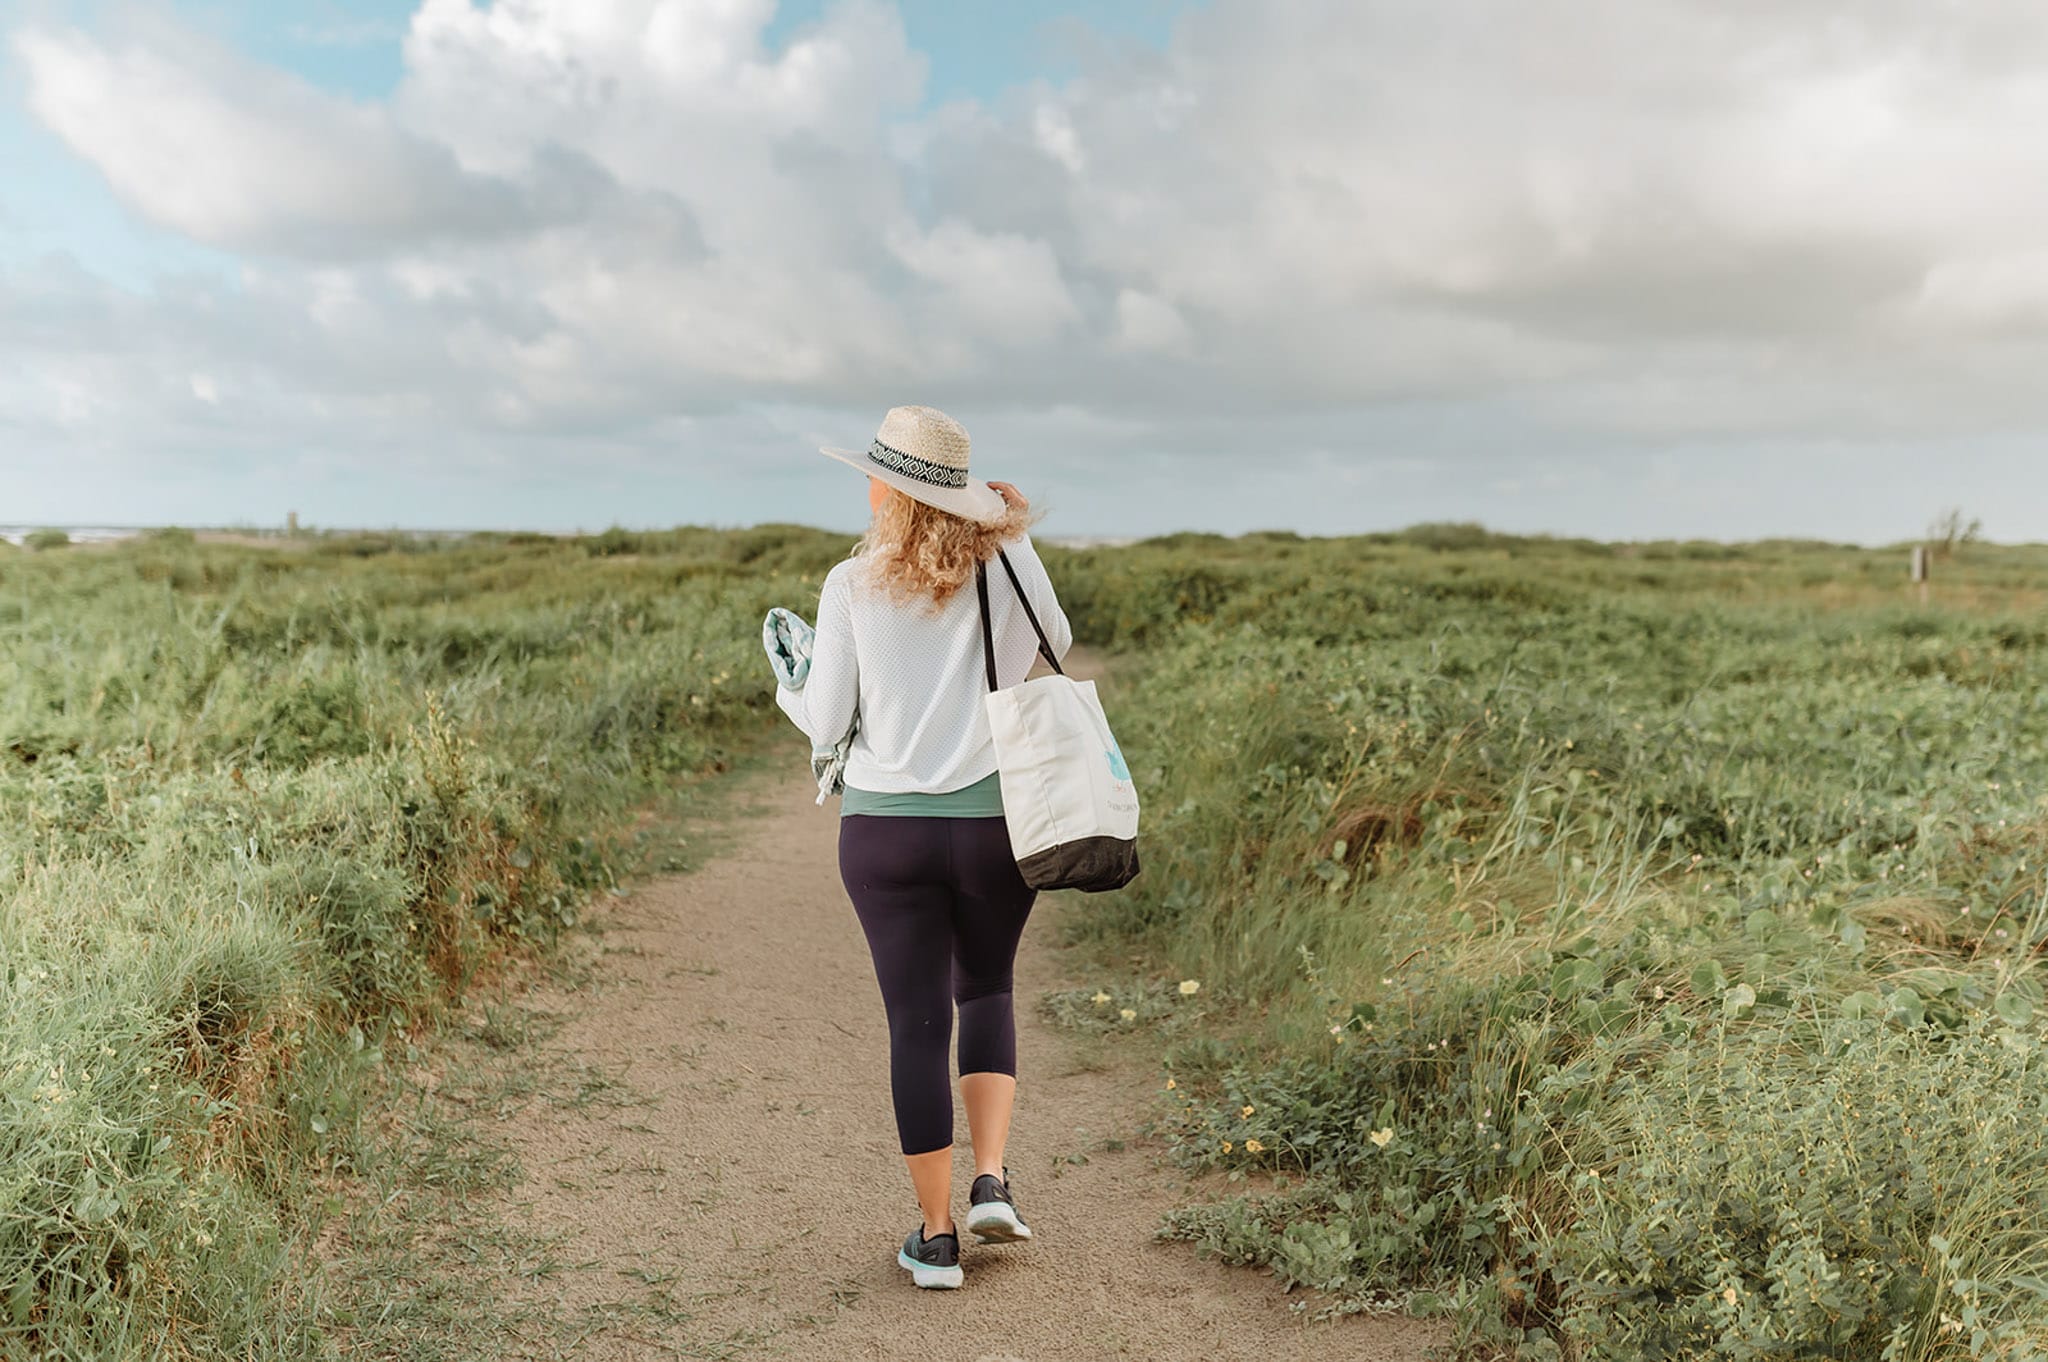 Kim walks down a beach path with a white bag over her shoulder. She's wearing leggings, a white shirt, and a white beach hat.